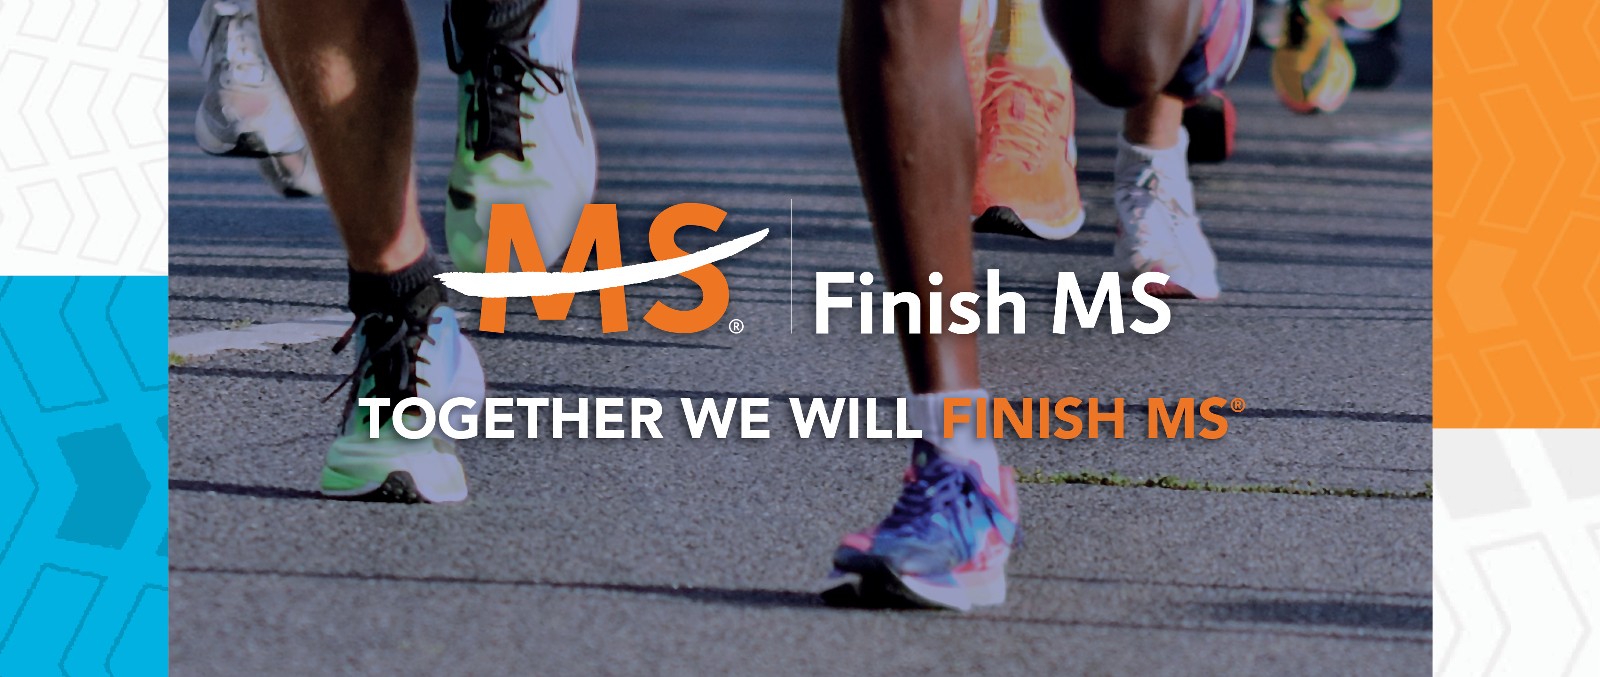 Finish MS - Together, We Will Finish MS